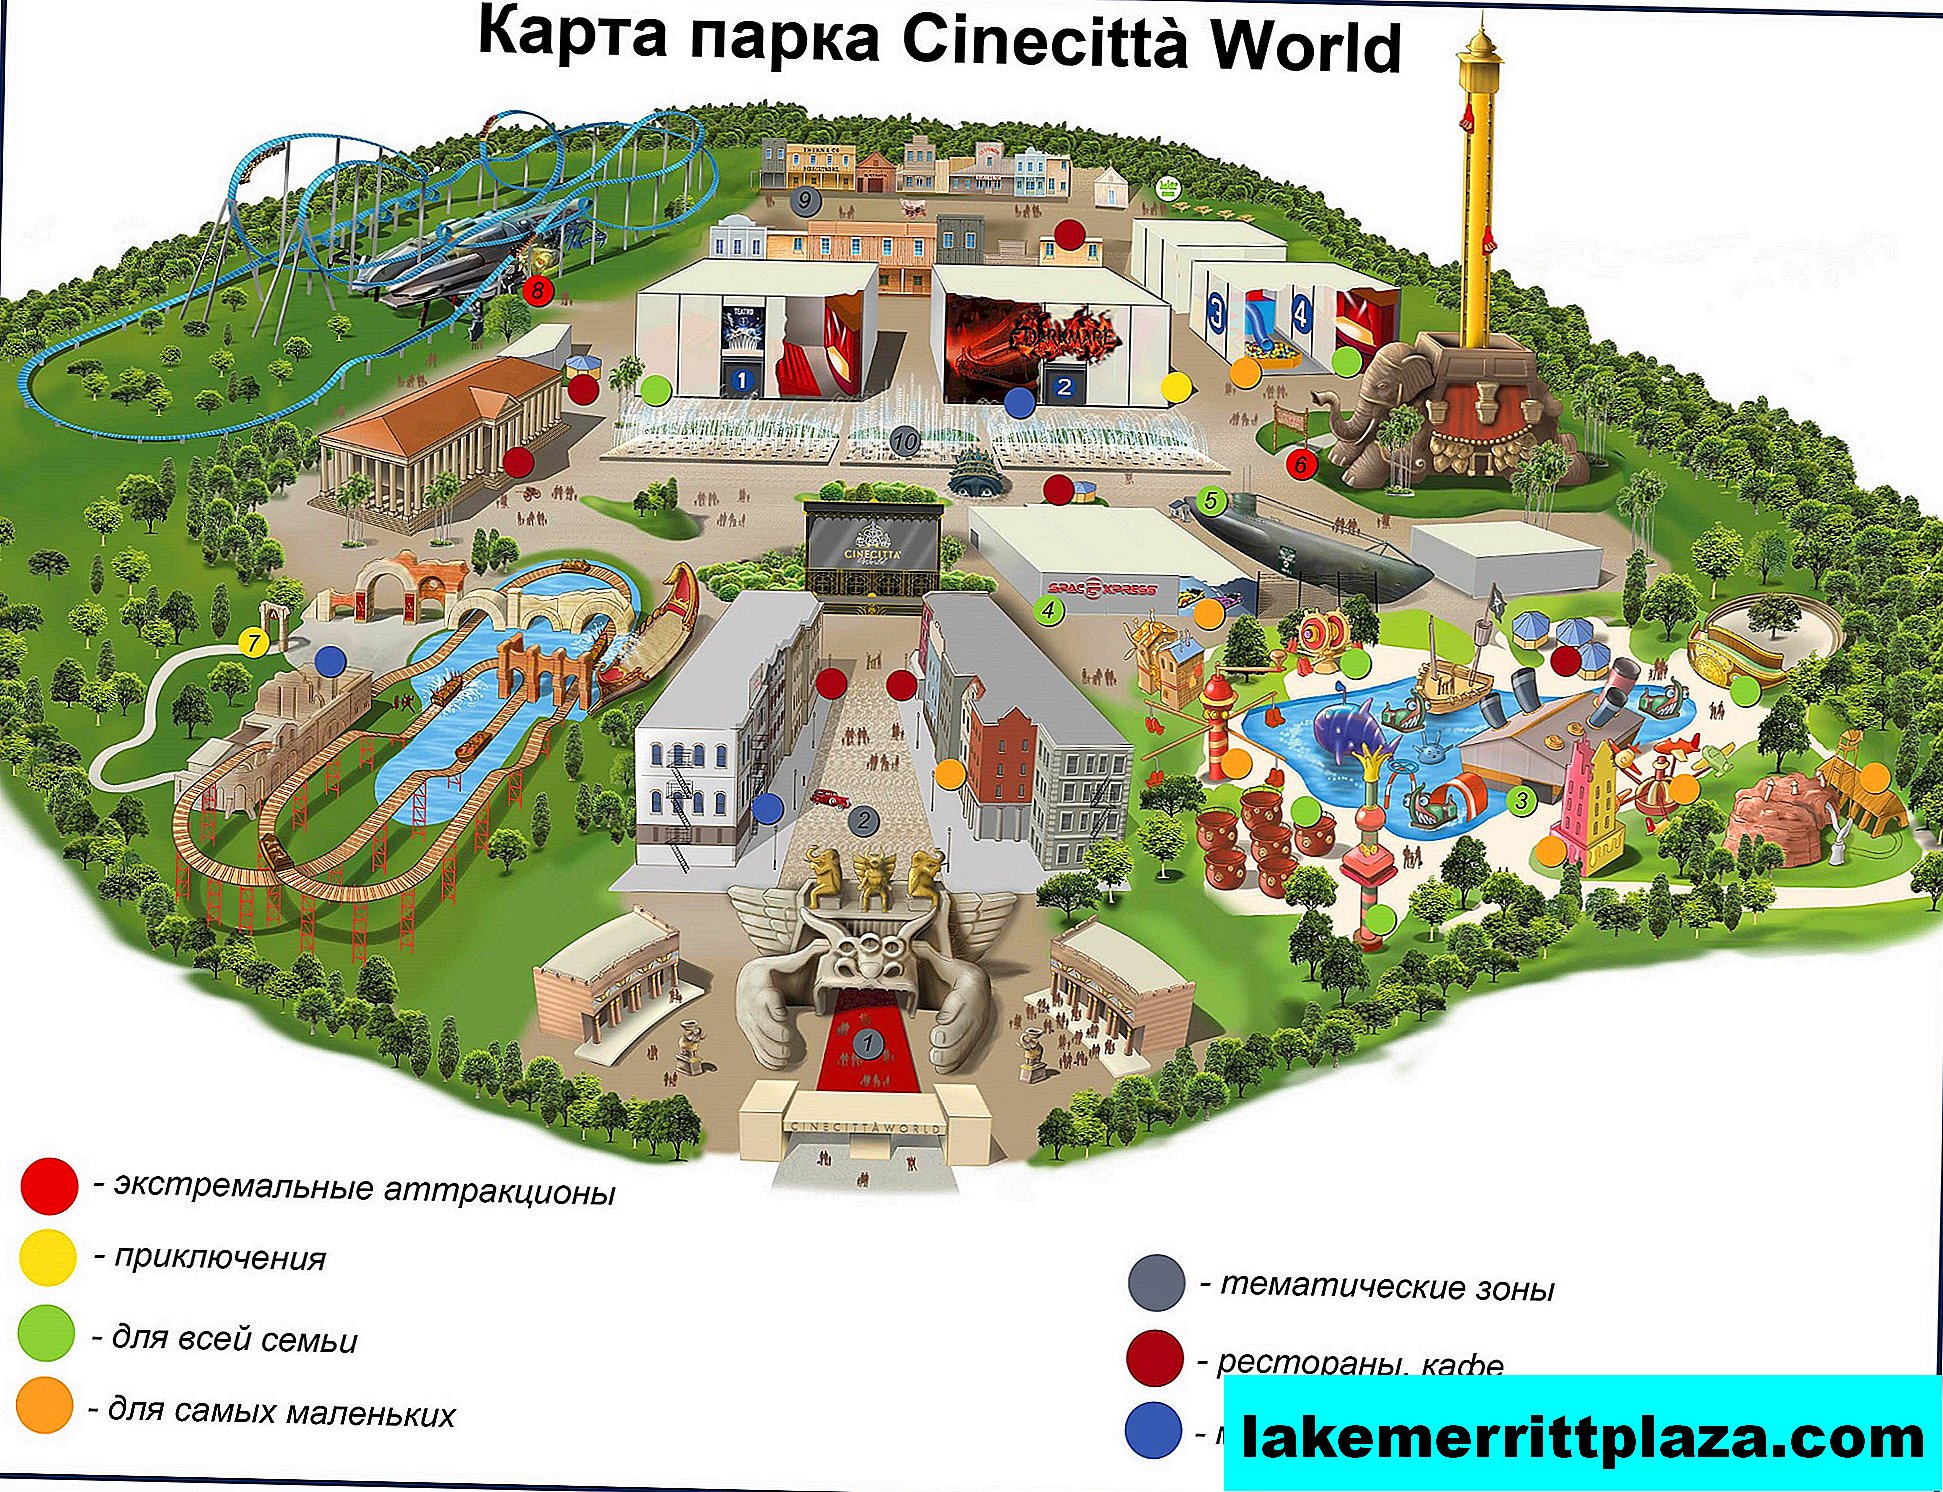 Cinechitta World - Italy's first cinema park for children and adults